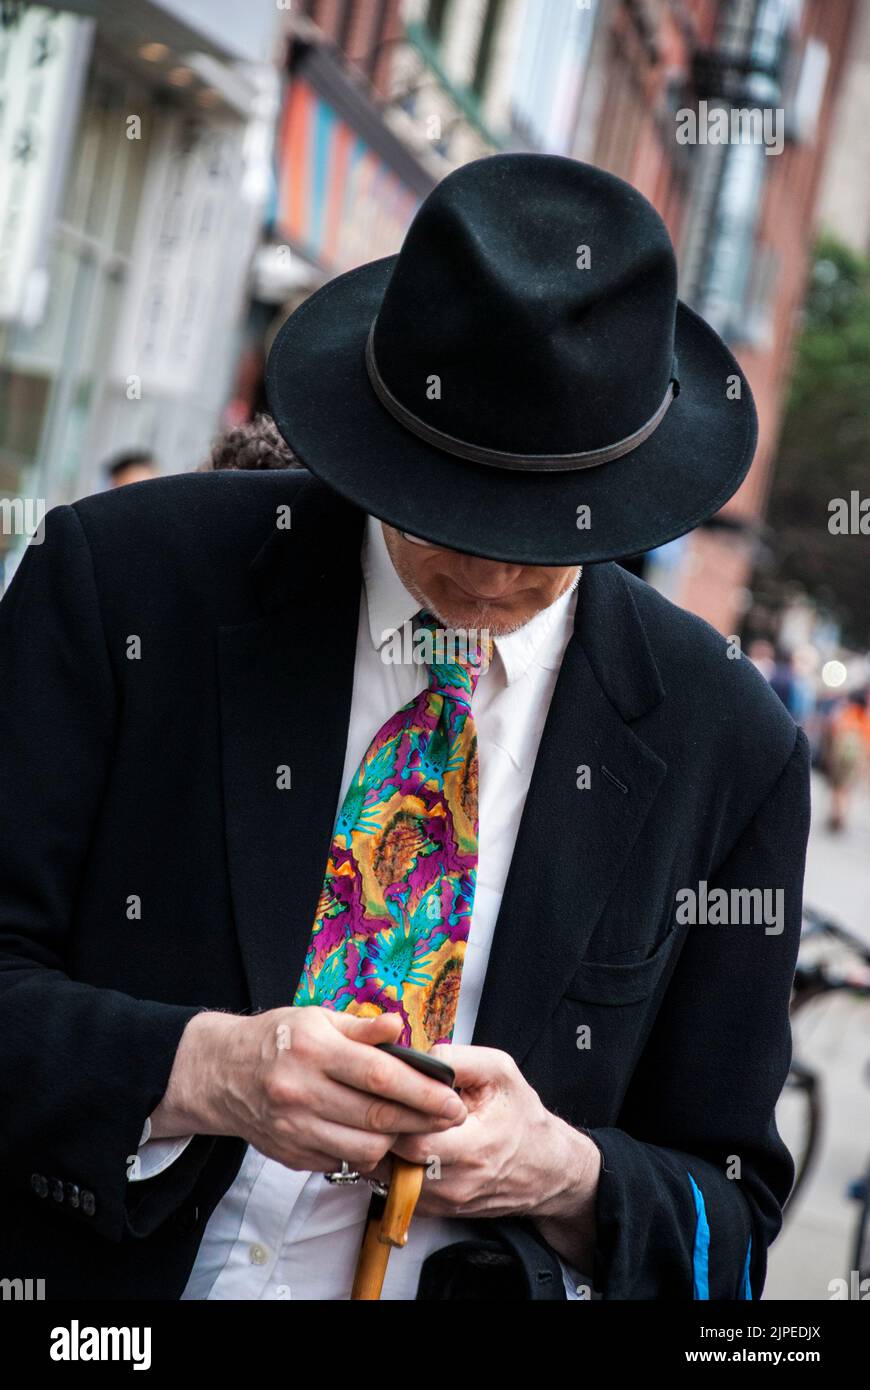 Man wearing 1930s style fedora hat and pin-stripe suit with a wide and colorful tie, New York City, NY, USA Stock Photo